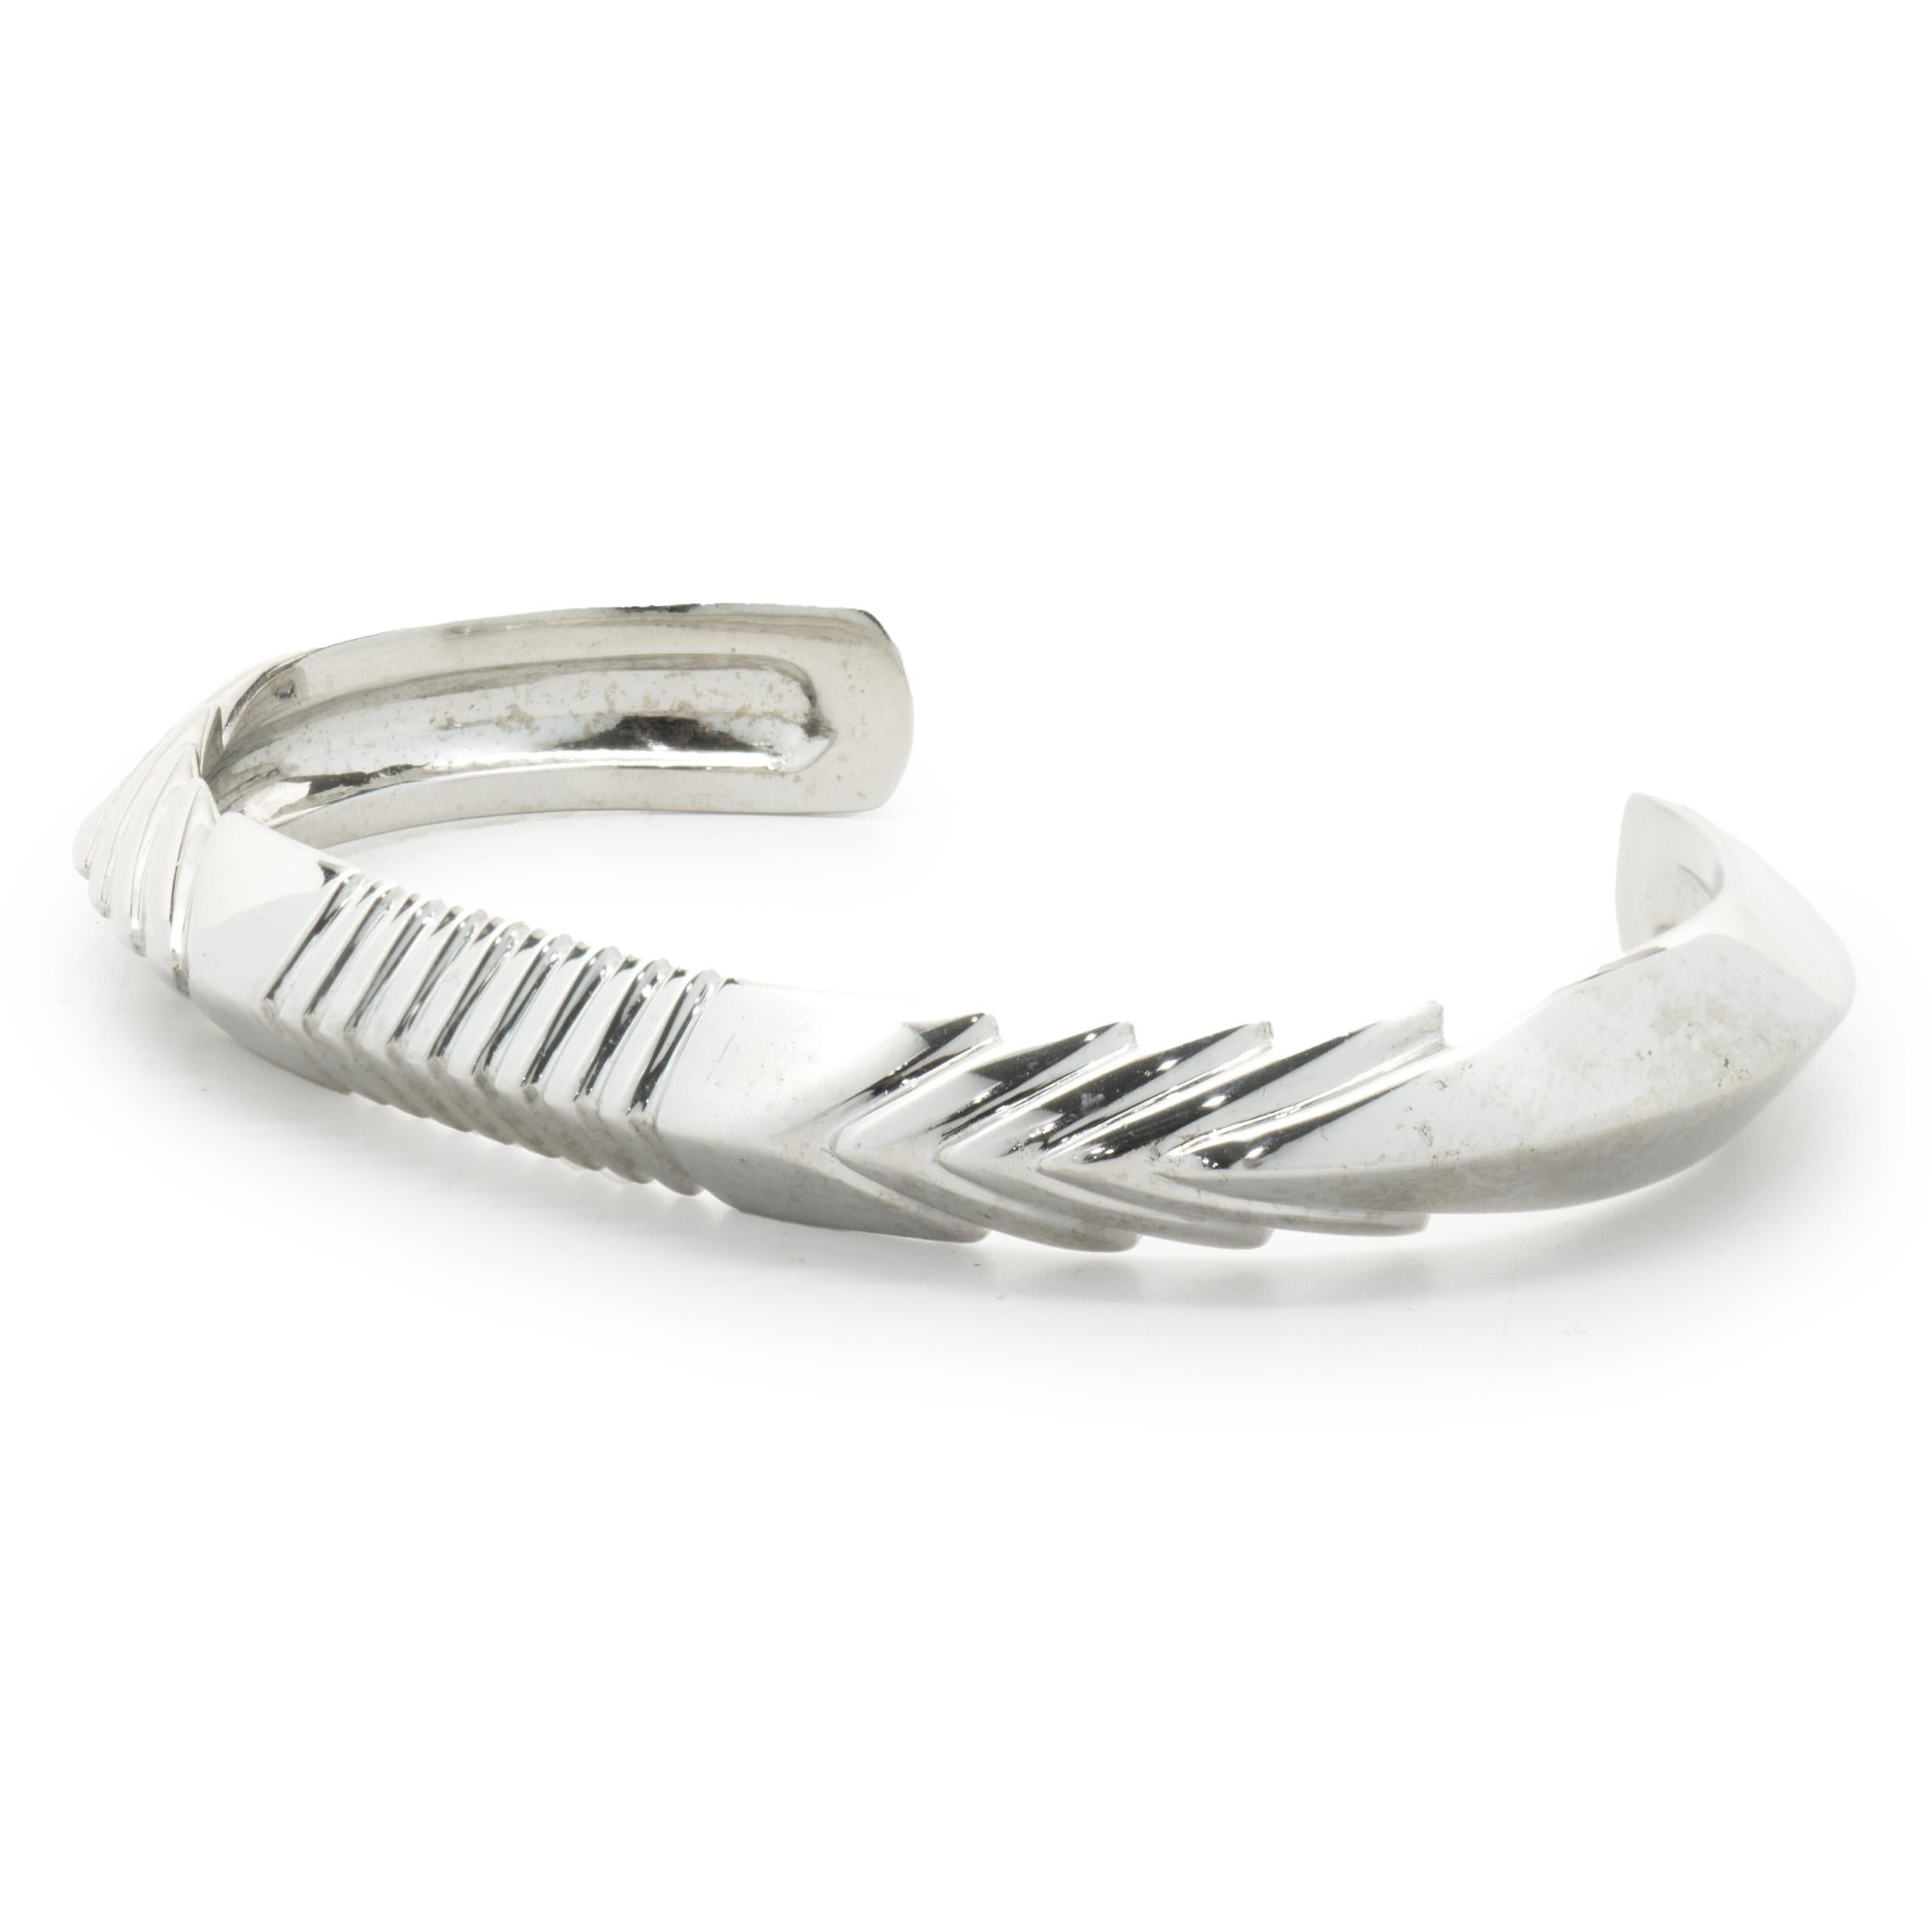 Material: 14K white gold
Dimensions: bracelet will fit up to a 6.5-inch wrist
Weight: 42.72 grams